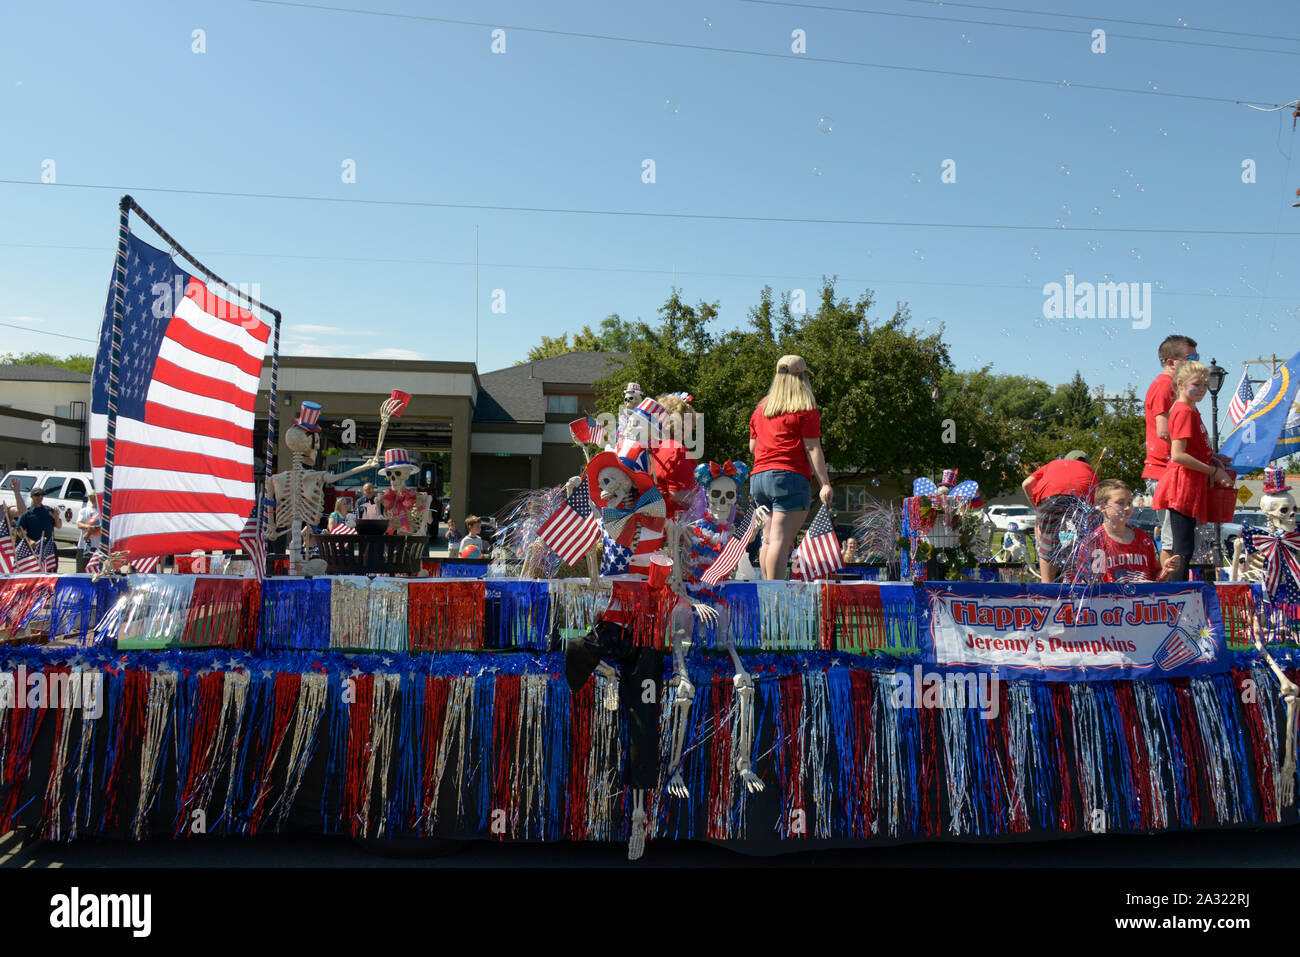 Parade Floats, American flags, Float, July 4, Independence Day, 4th of